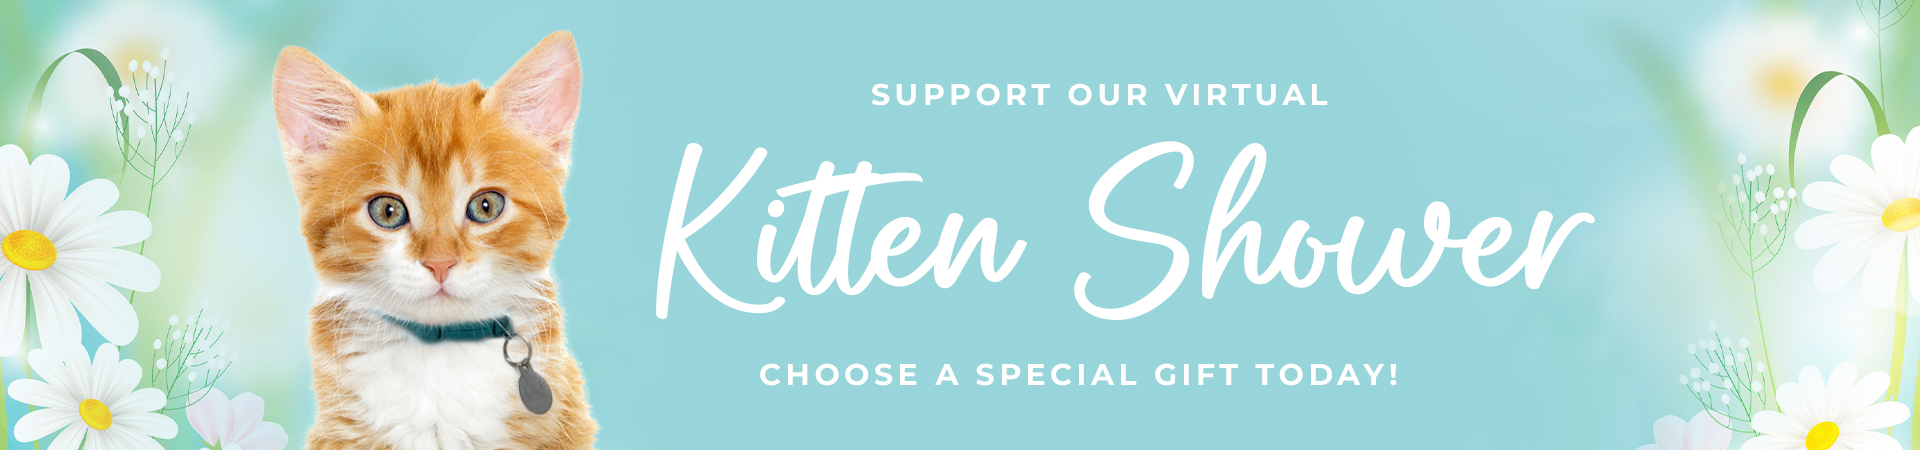 Support our virtual Kitten Shower. Choose a special gift today!